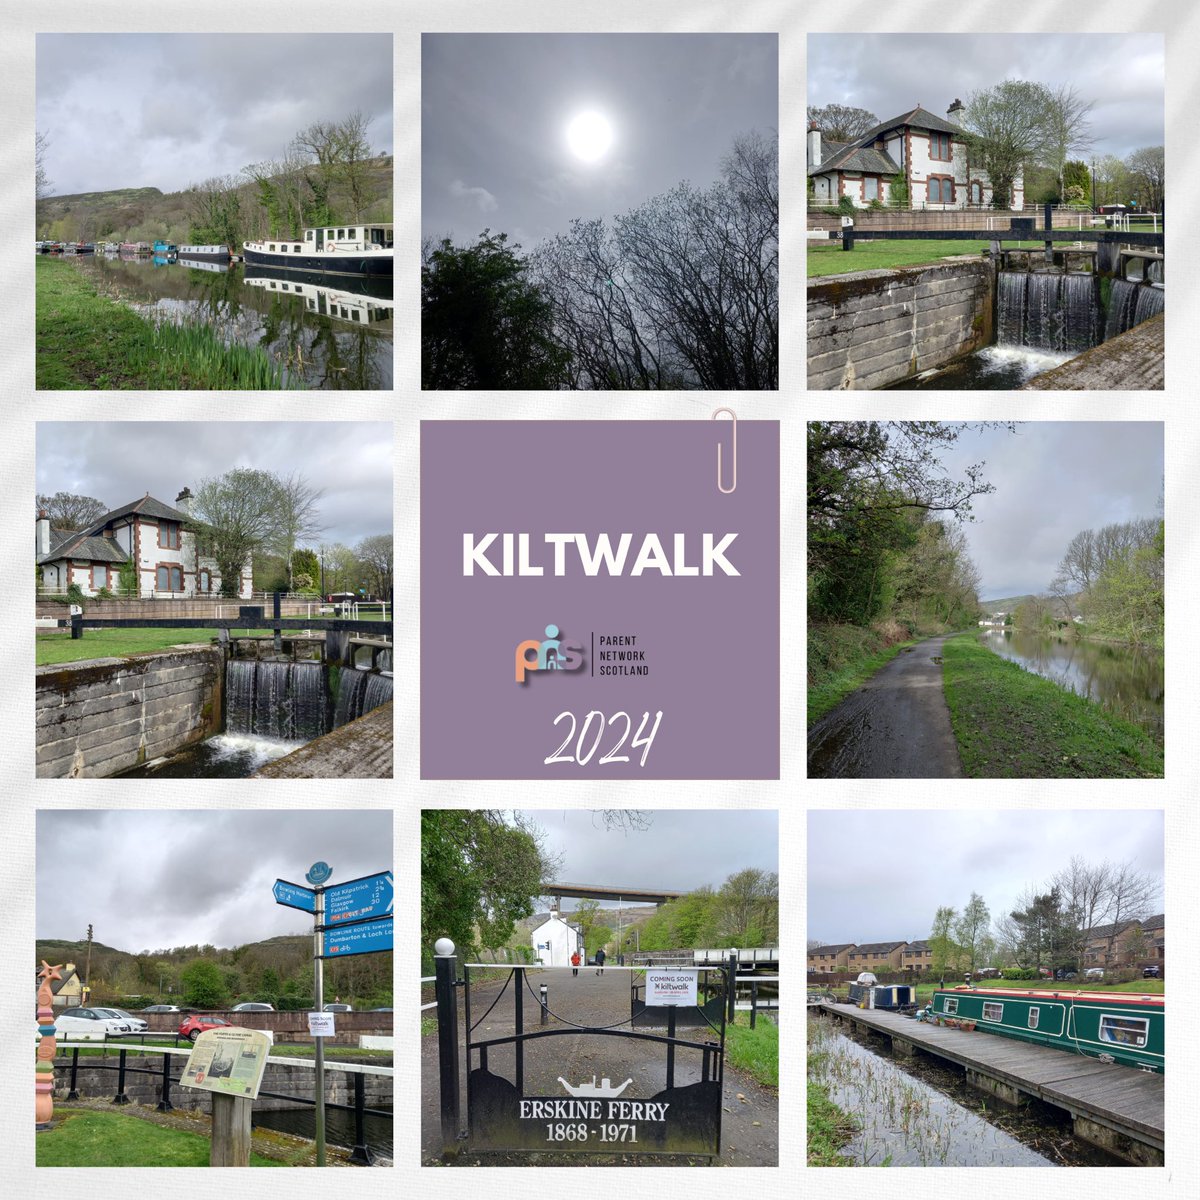 Angie Team PNS weekend training for @Kiltwalk 20 miles total! 🚶‍♀️🌟 New trainers, new fitness levels, and slept like a baby both nights!#kiltwak2024 Please donate today! 💜 parentnetworkscotland.com/kiltwalk-donate